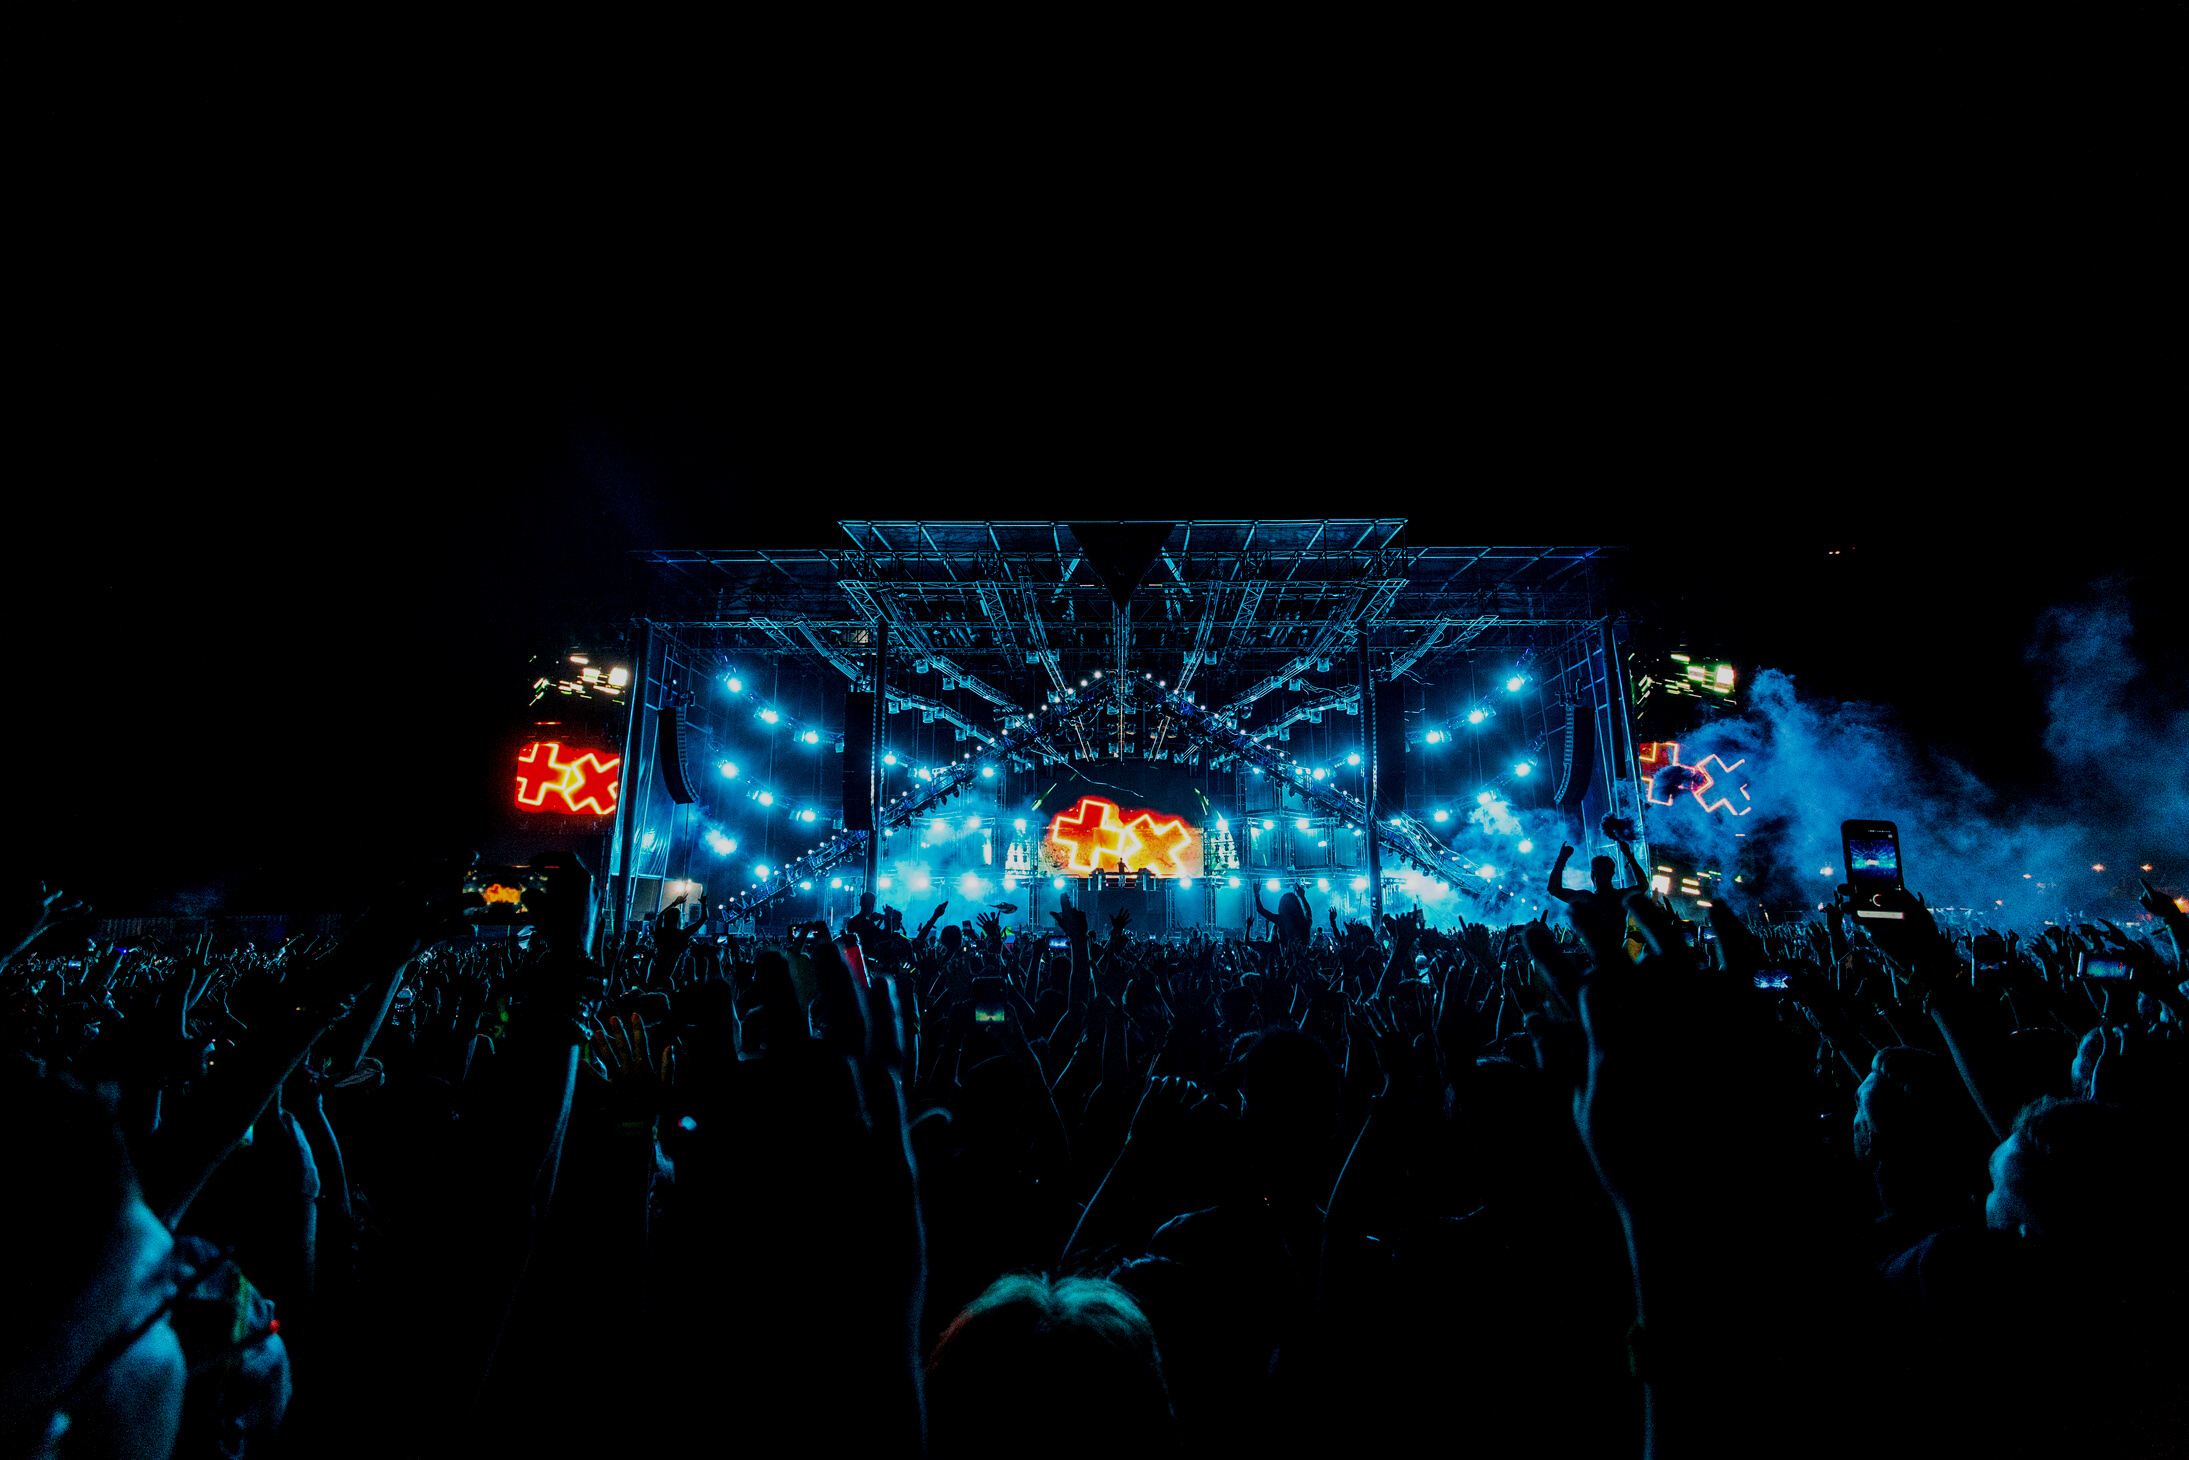 Crowd in Front of Blue and Orange Stage during a Concert at Night